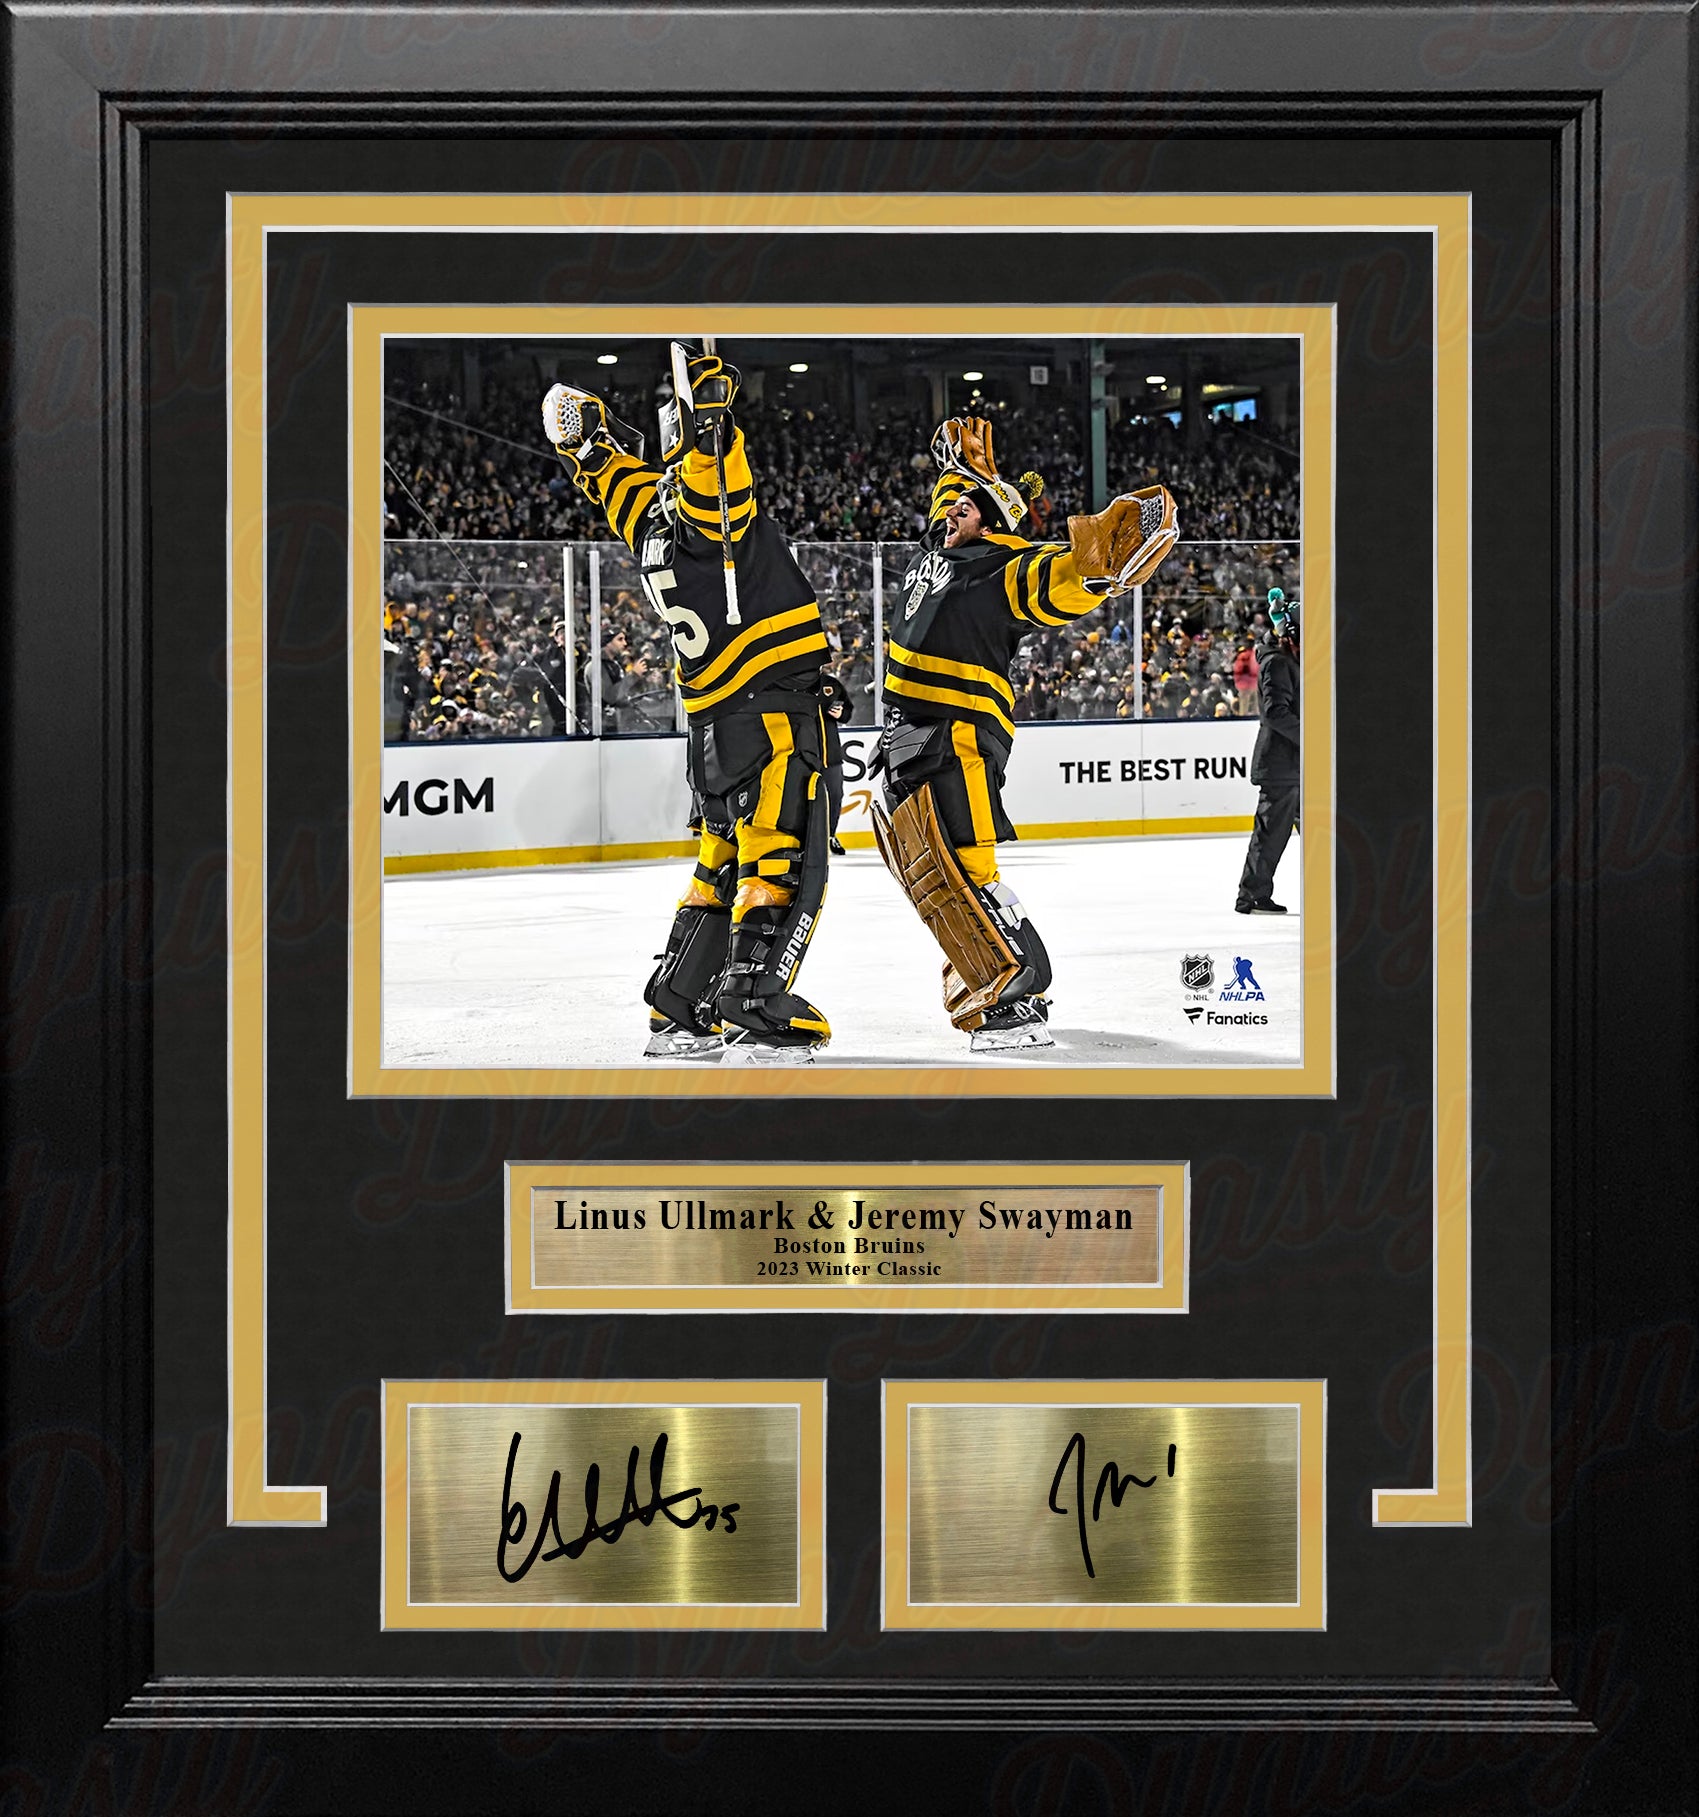 Linus Ullmark & Jeremy Swayman Winter Classic Boston Bruins Framed Photo with Engraved Autographs - Dynasty Sports & Framing 